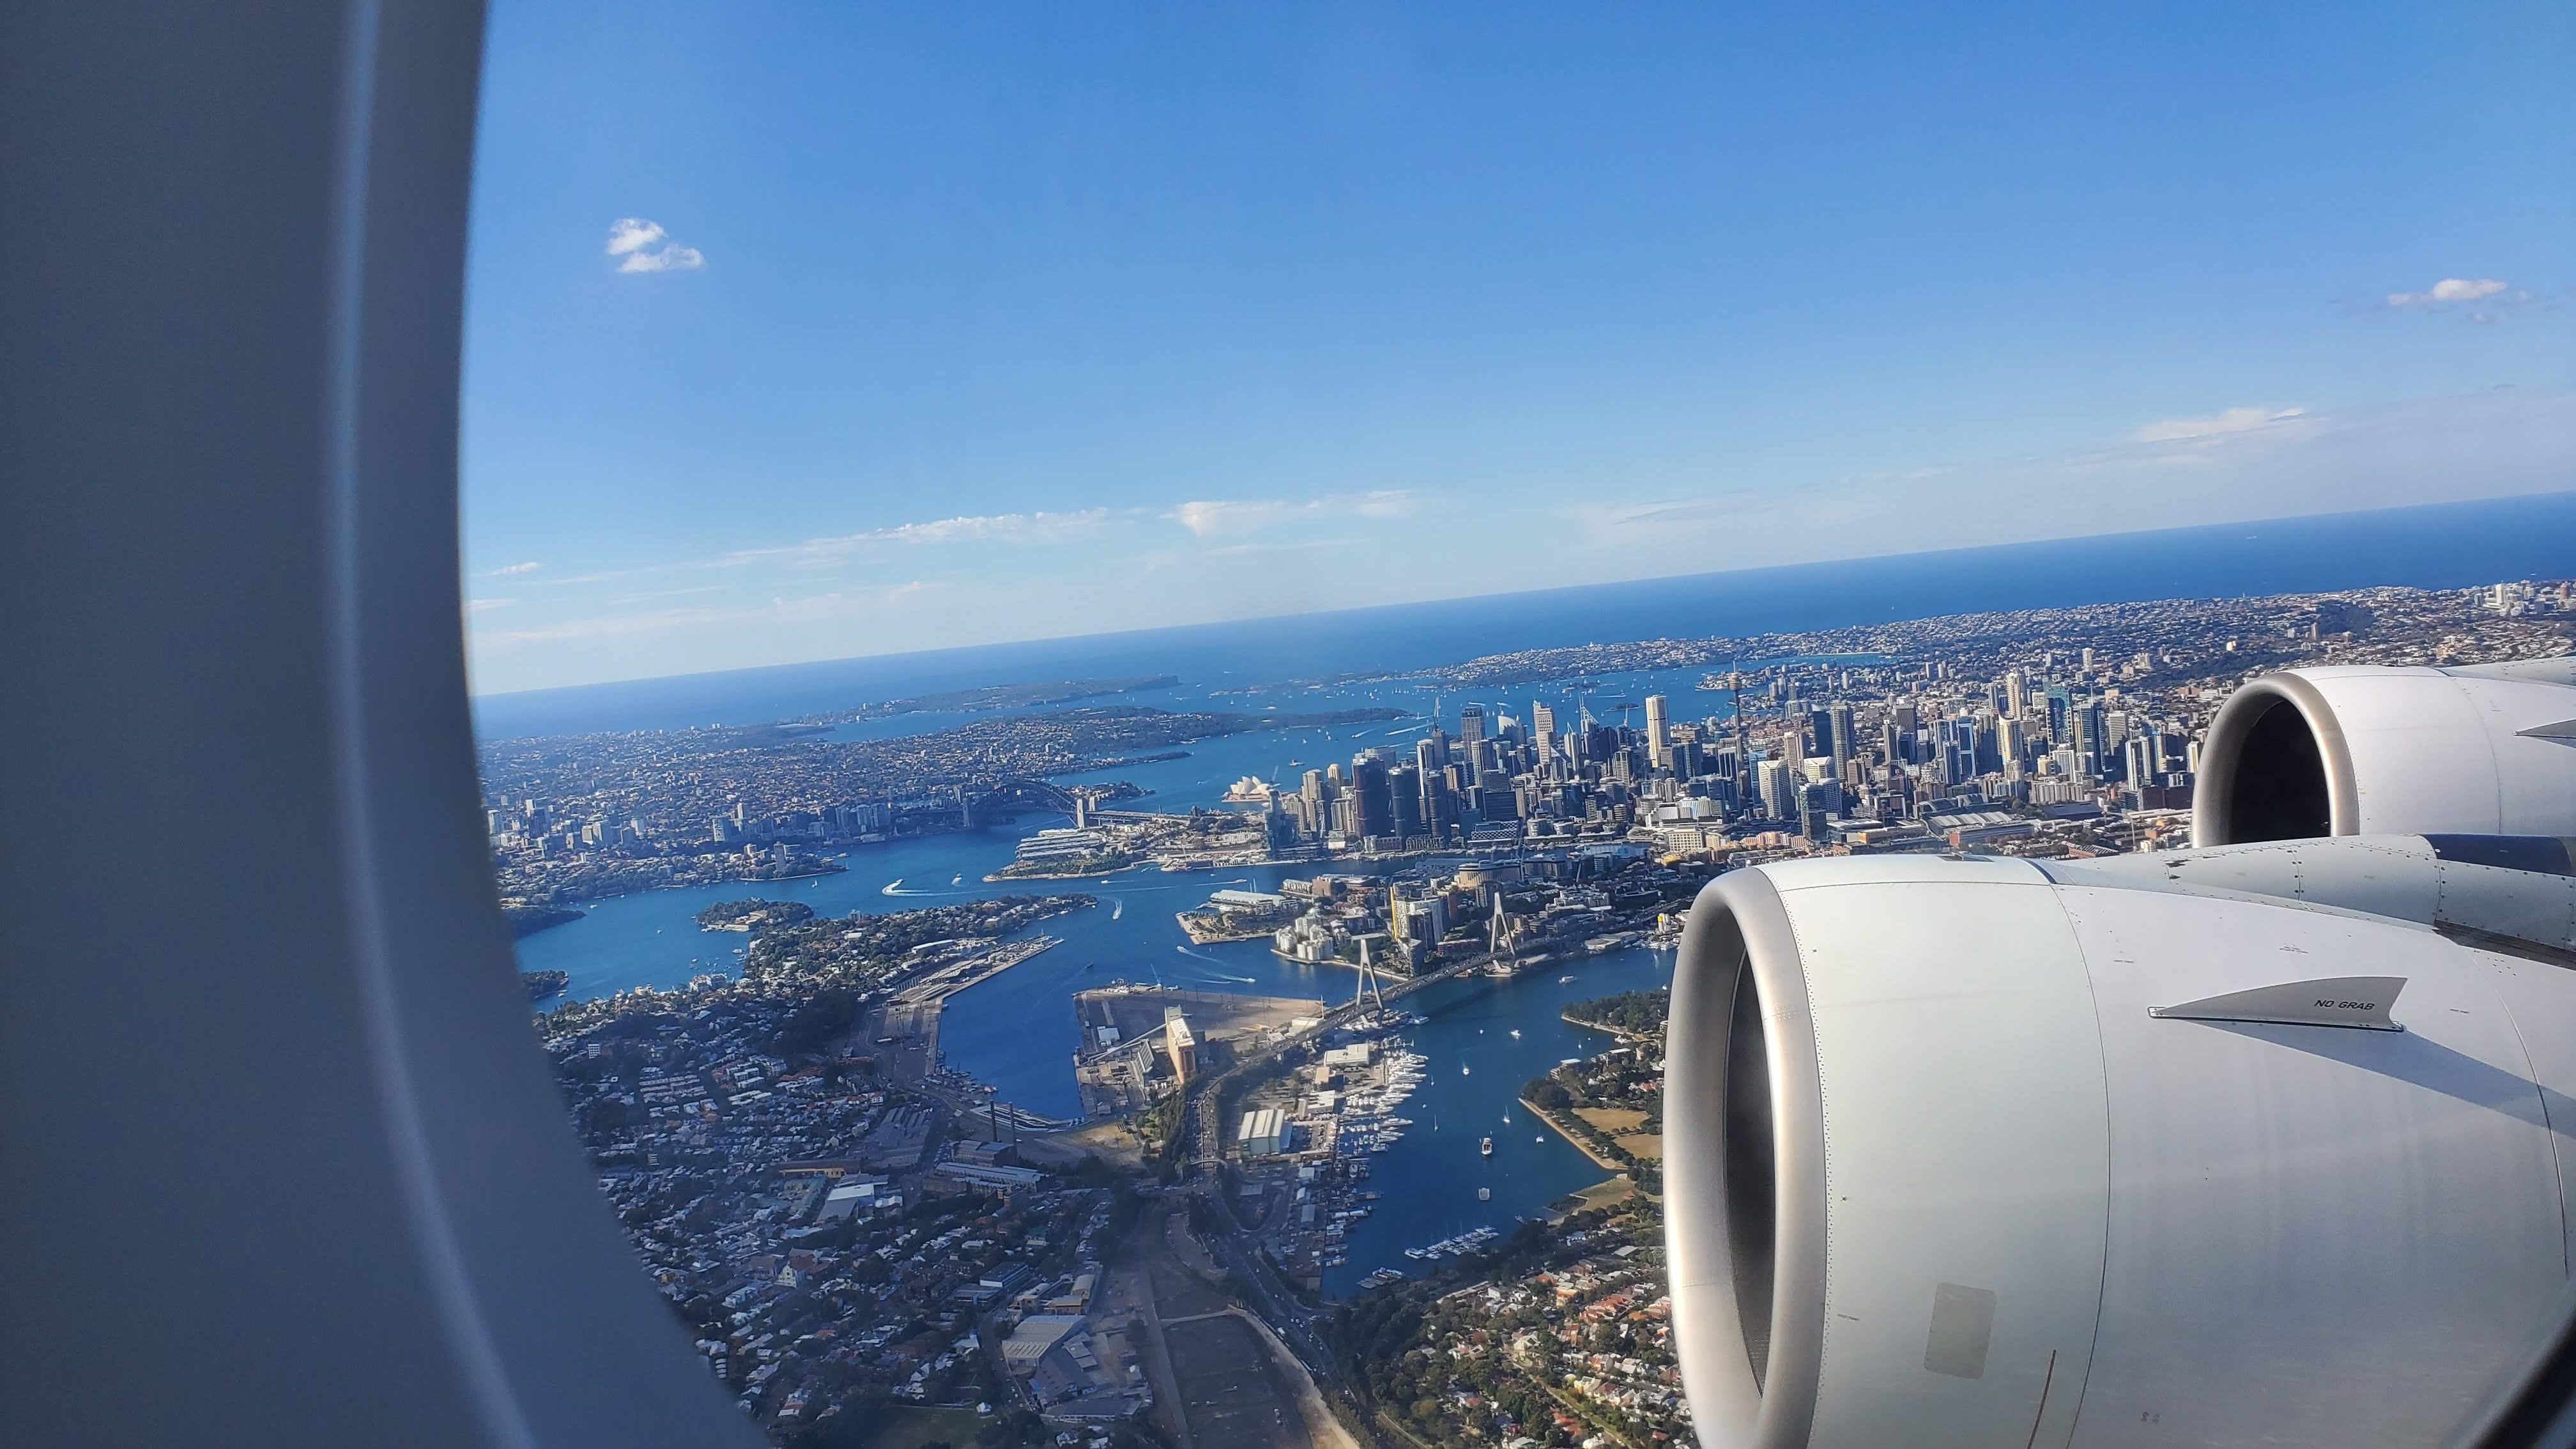 View from airplane window over Sydney, Australia. 